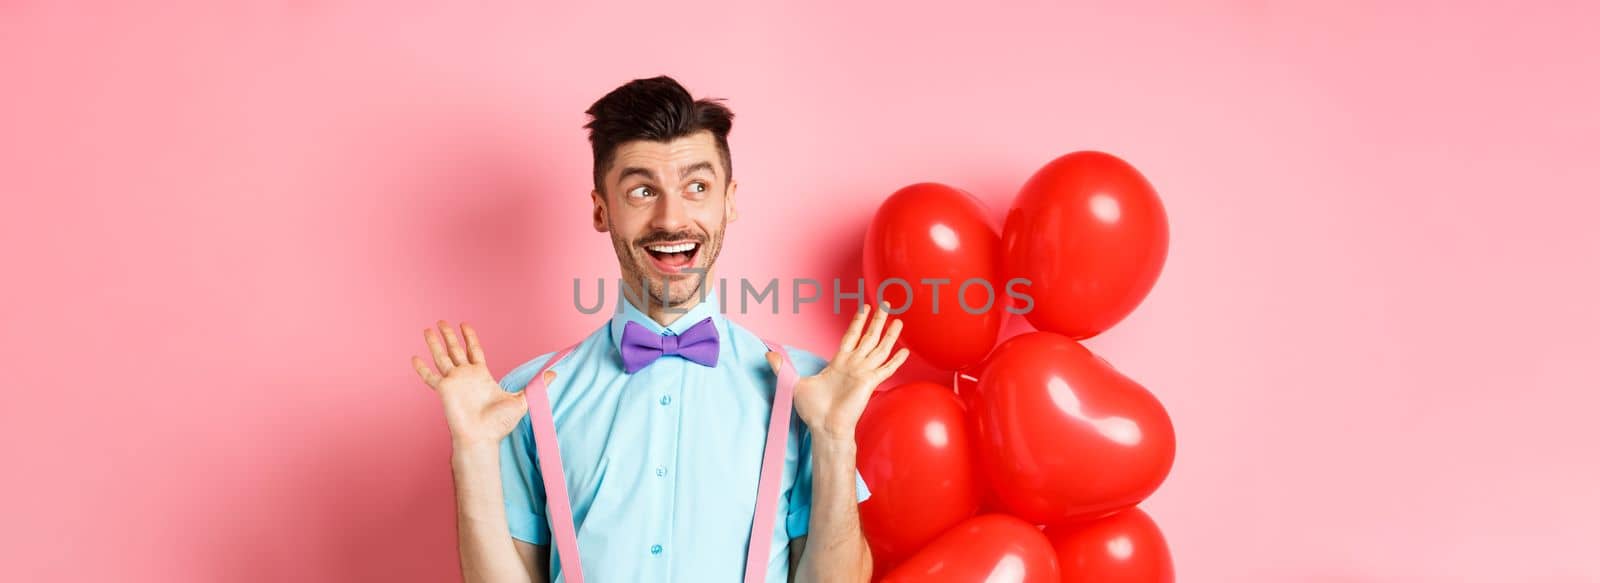 Love and romance concept. Happy man screaming from fantastic news, shouting wow and smiling amused, checking out special offer on Valentines, standing near red hearts balloons.